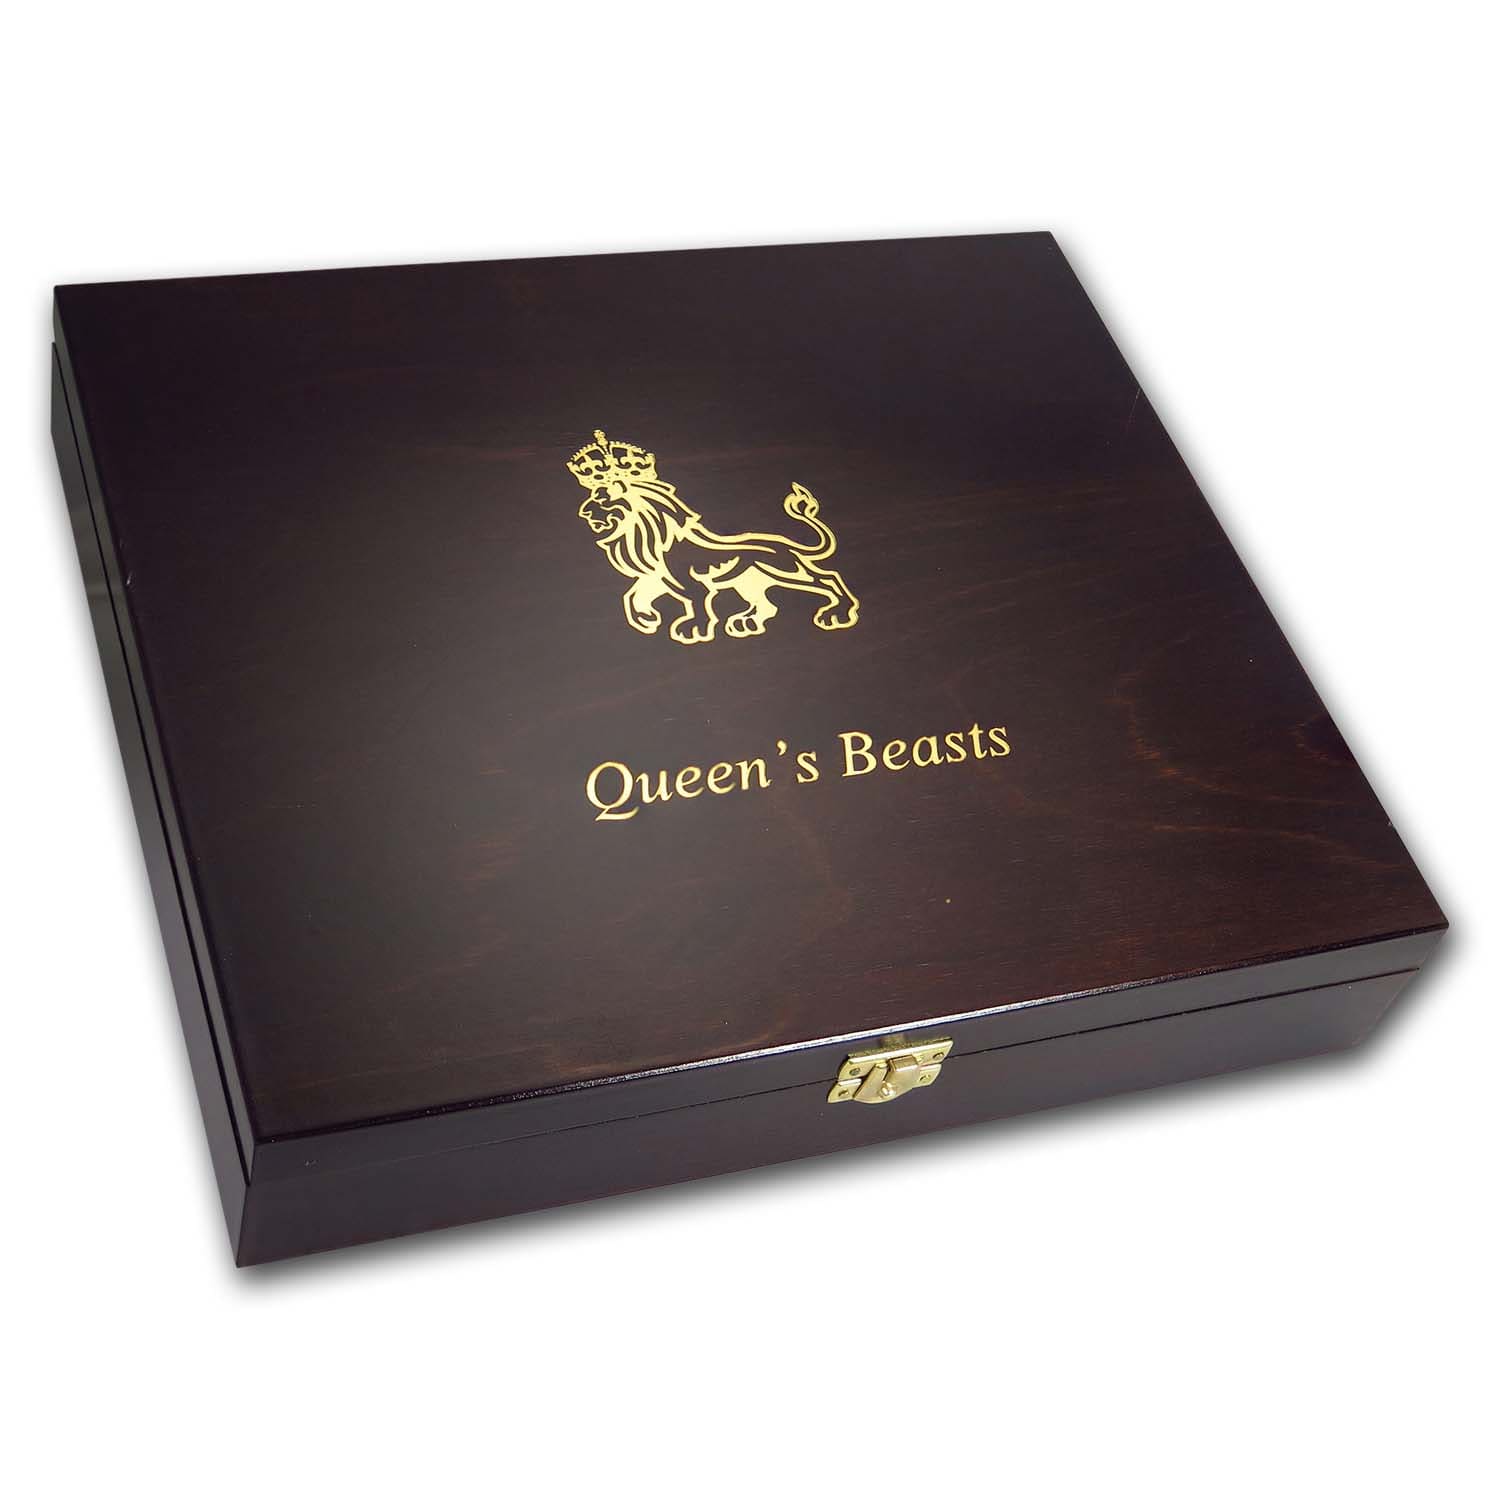 Buy Wooden Presentation Box - GB 10 oz Silver Queen's Beasts Series